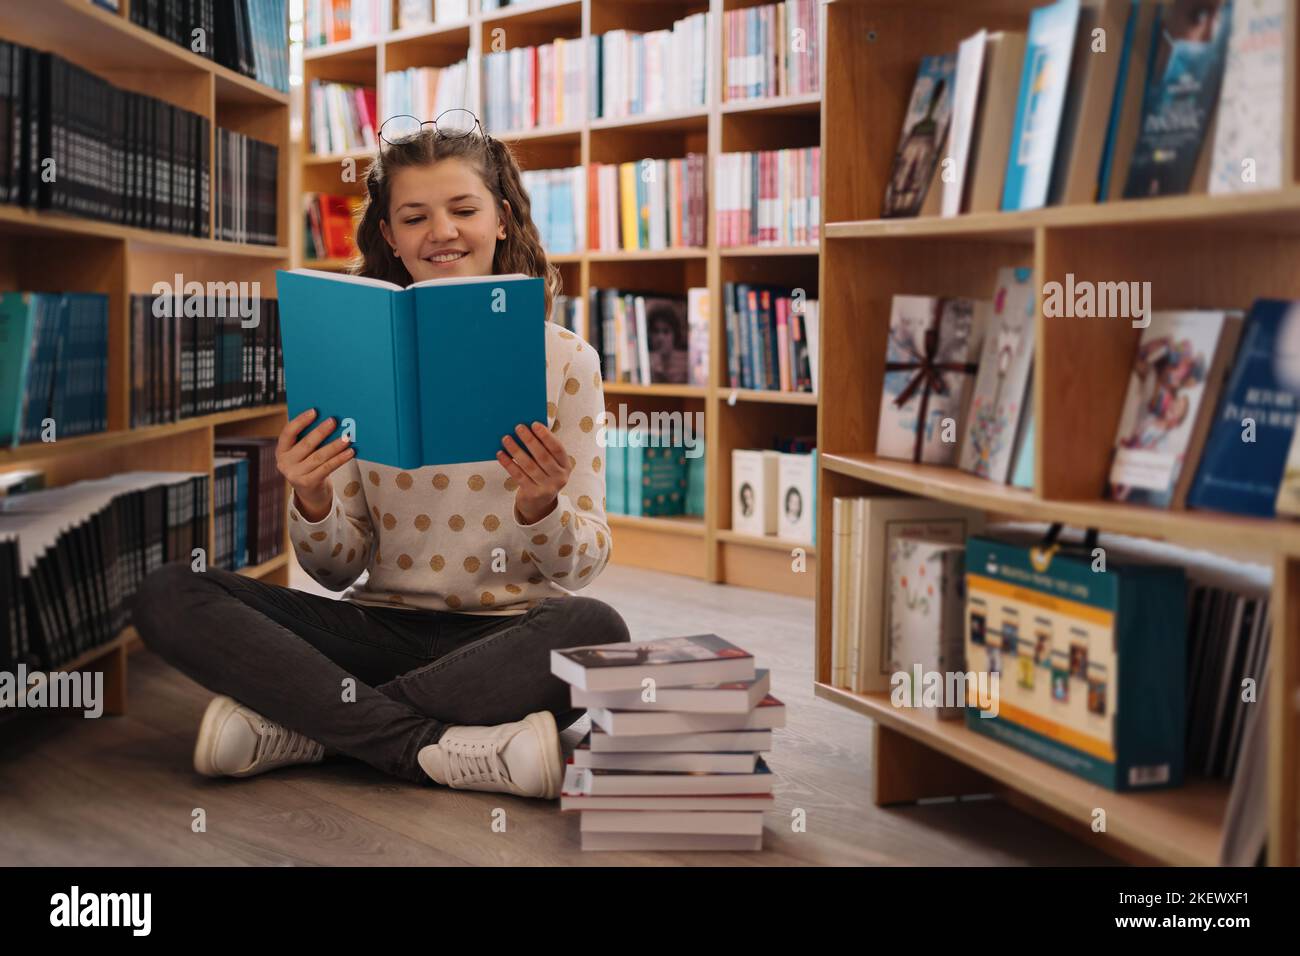 Teen girl among a pile of books. A young girl reads a book with shelves in the background. She is surrounded by stacks of books. Book day. Stock Photo